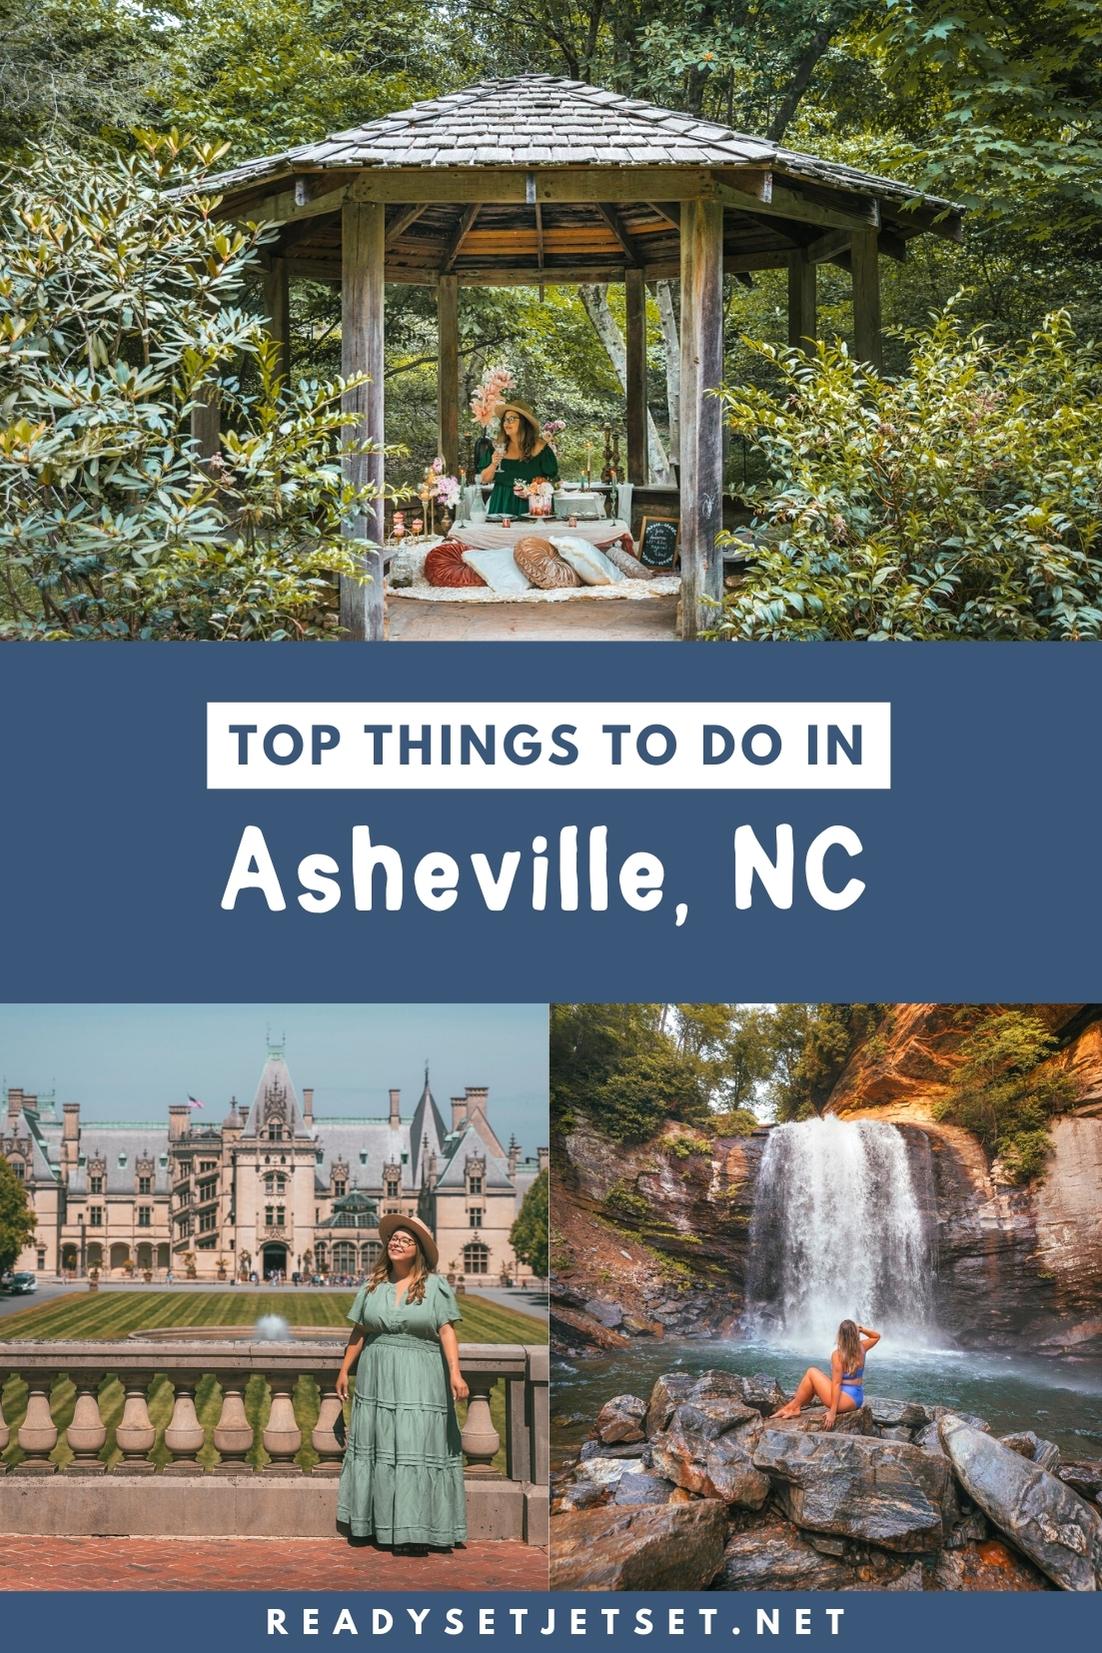 Top Things to Do in Asheville, NC